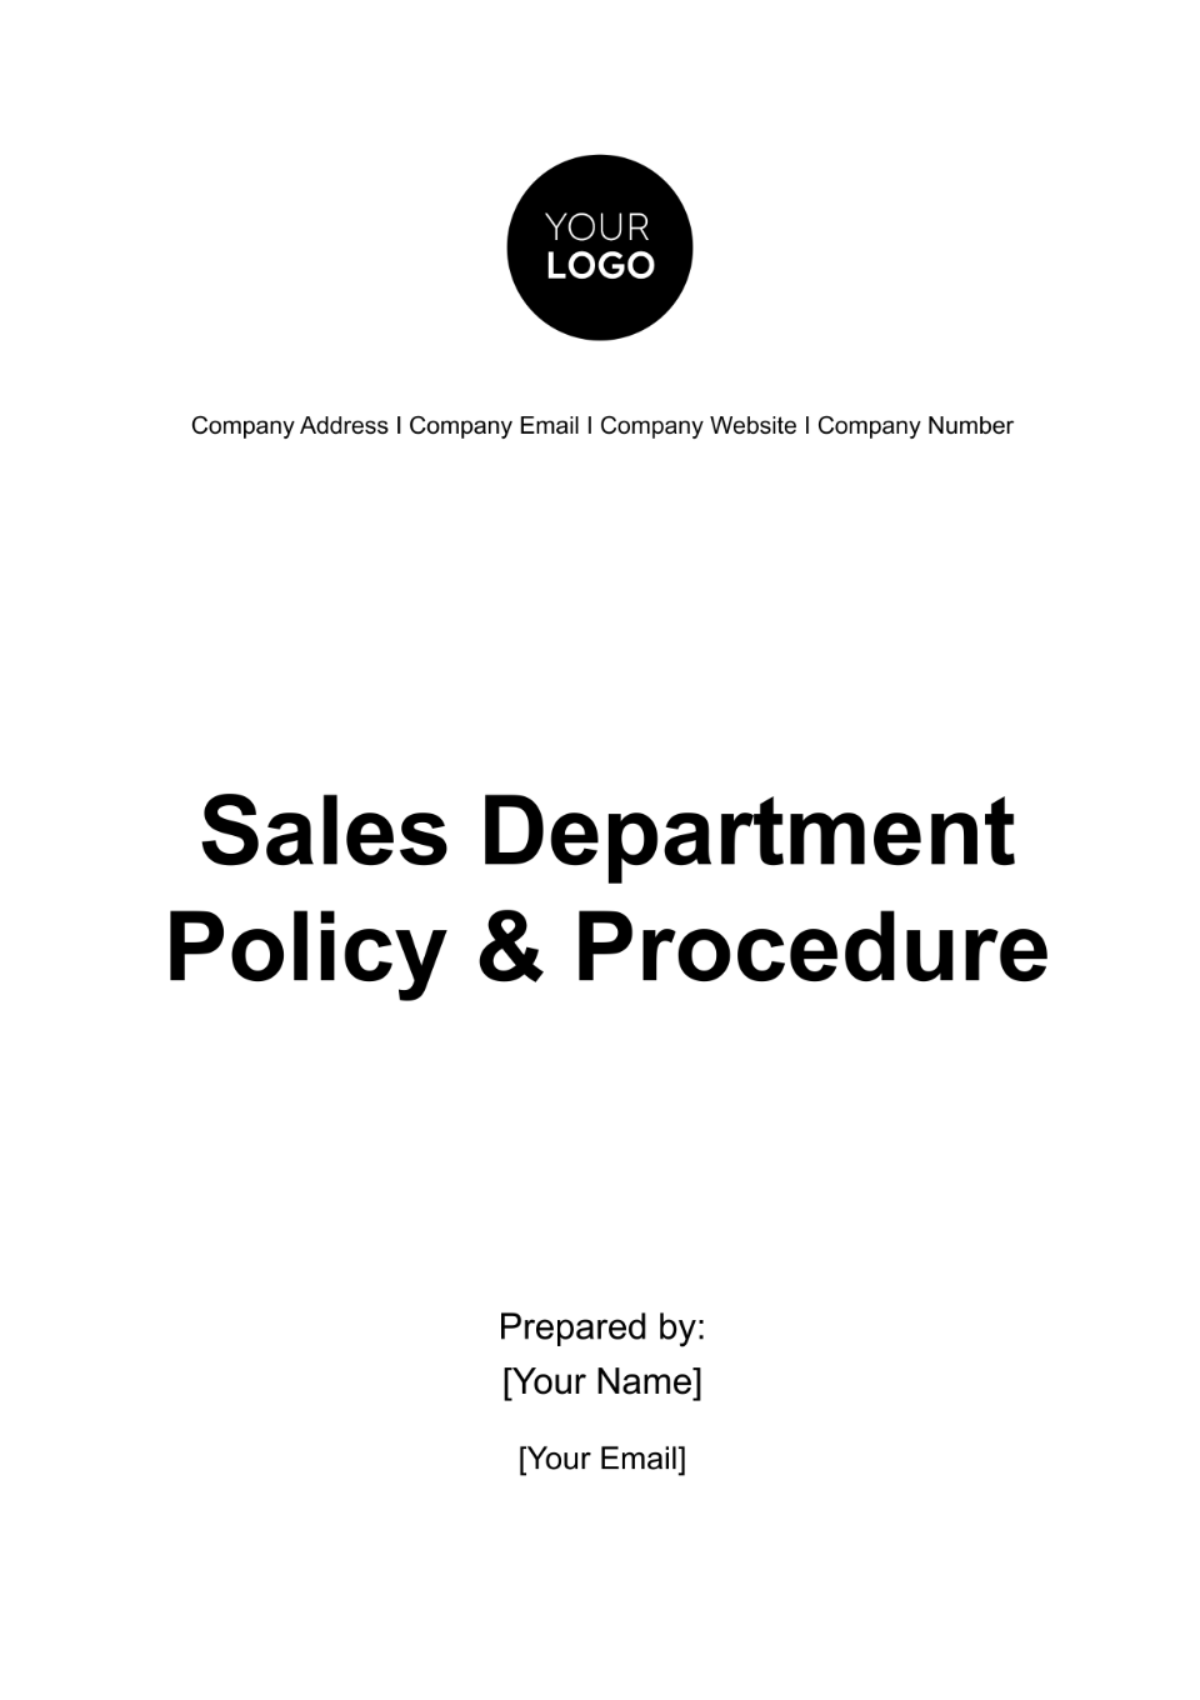 Sales Department Policy & Procedure Template